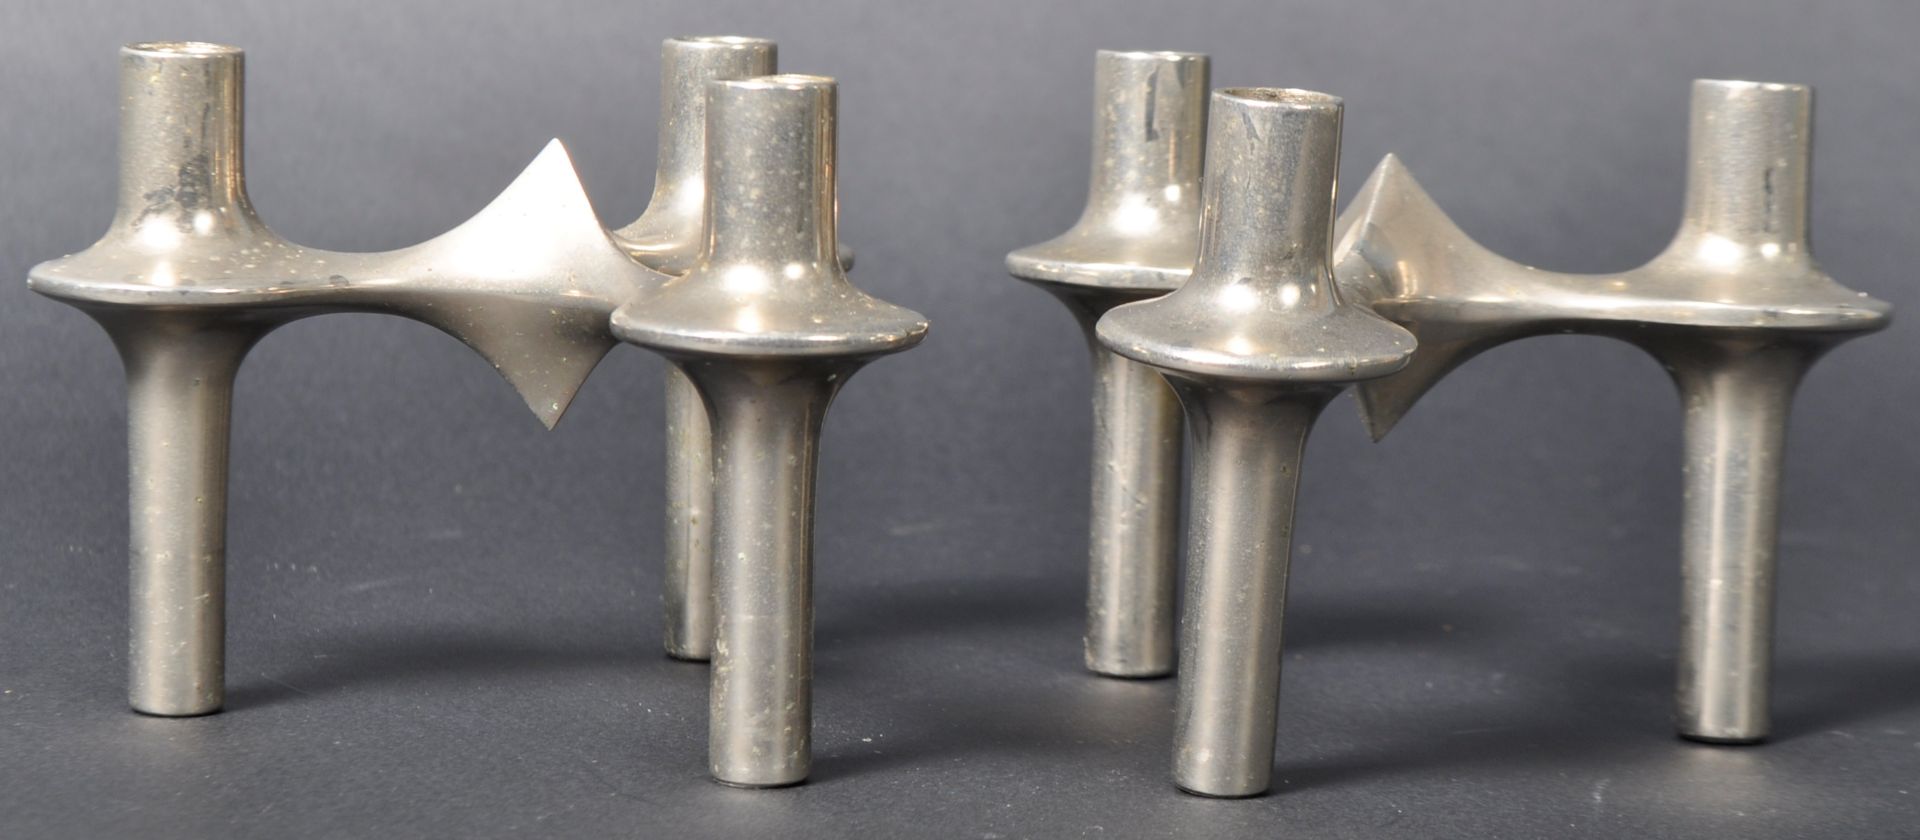 FRITZ NAGEL FOR QUIST (MANNER OF) - PAIR OF CANDLESTICKS